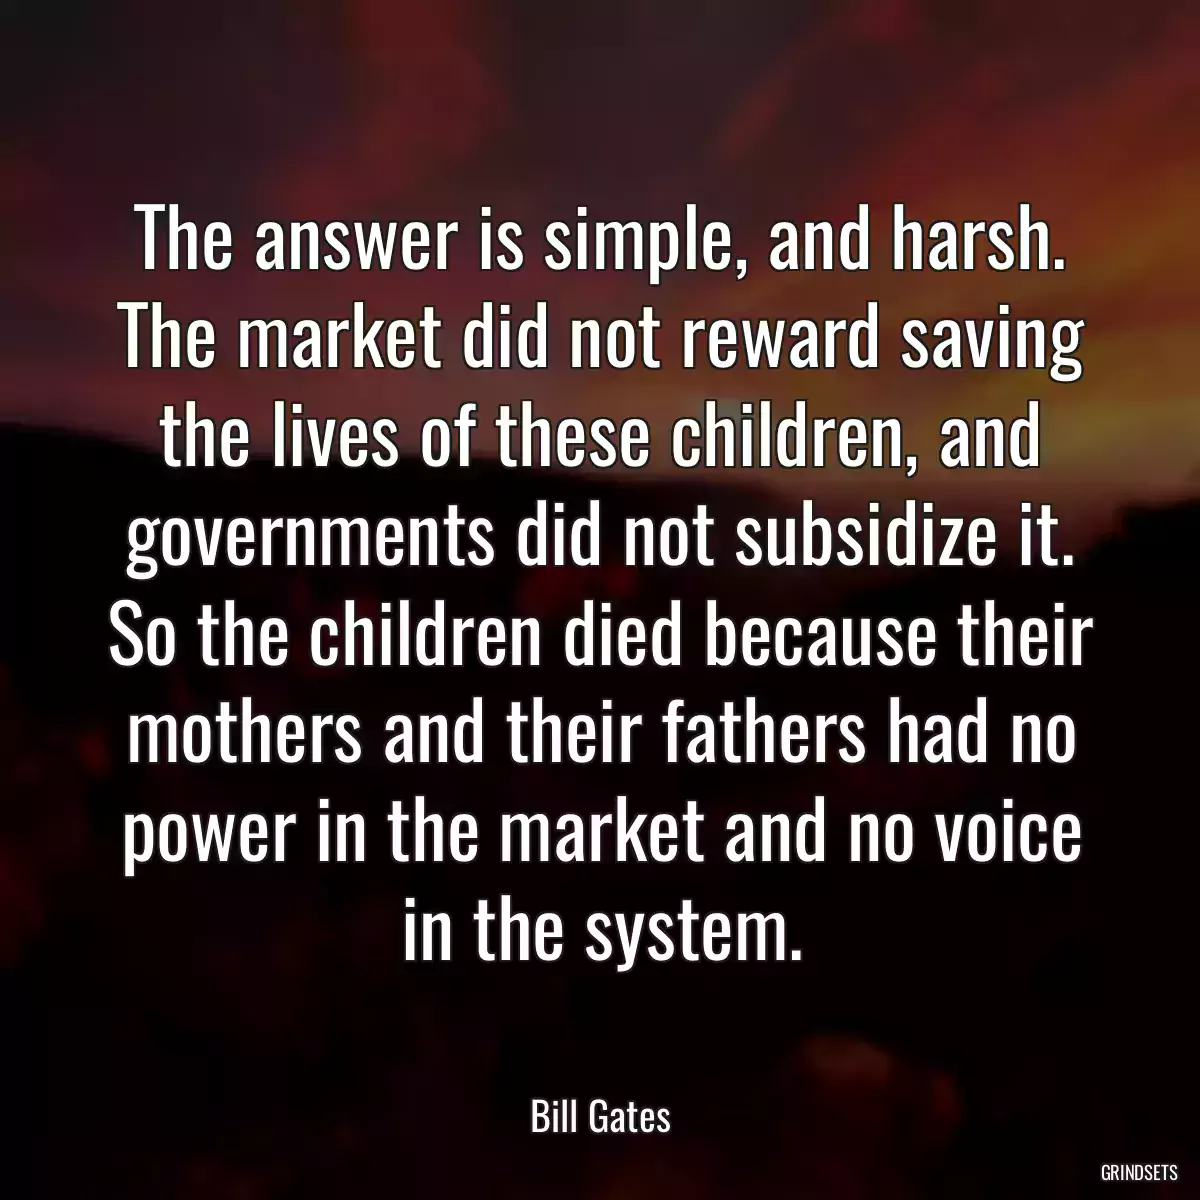 The answer is simple, and harsh. The market did not reward saving the lives of these children, and governments did not subsidize it. So the children died because their mothers and their fathers had no power in the market and no voice in the system.